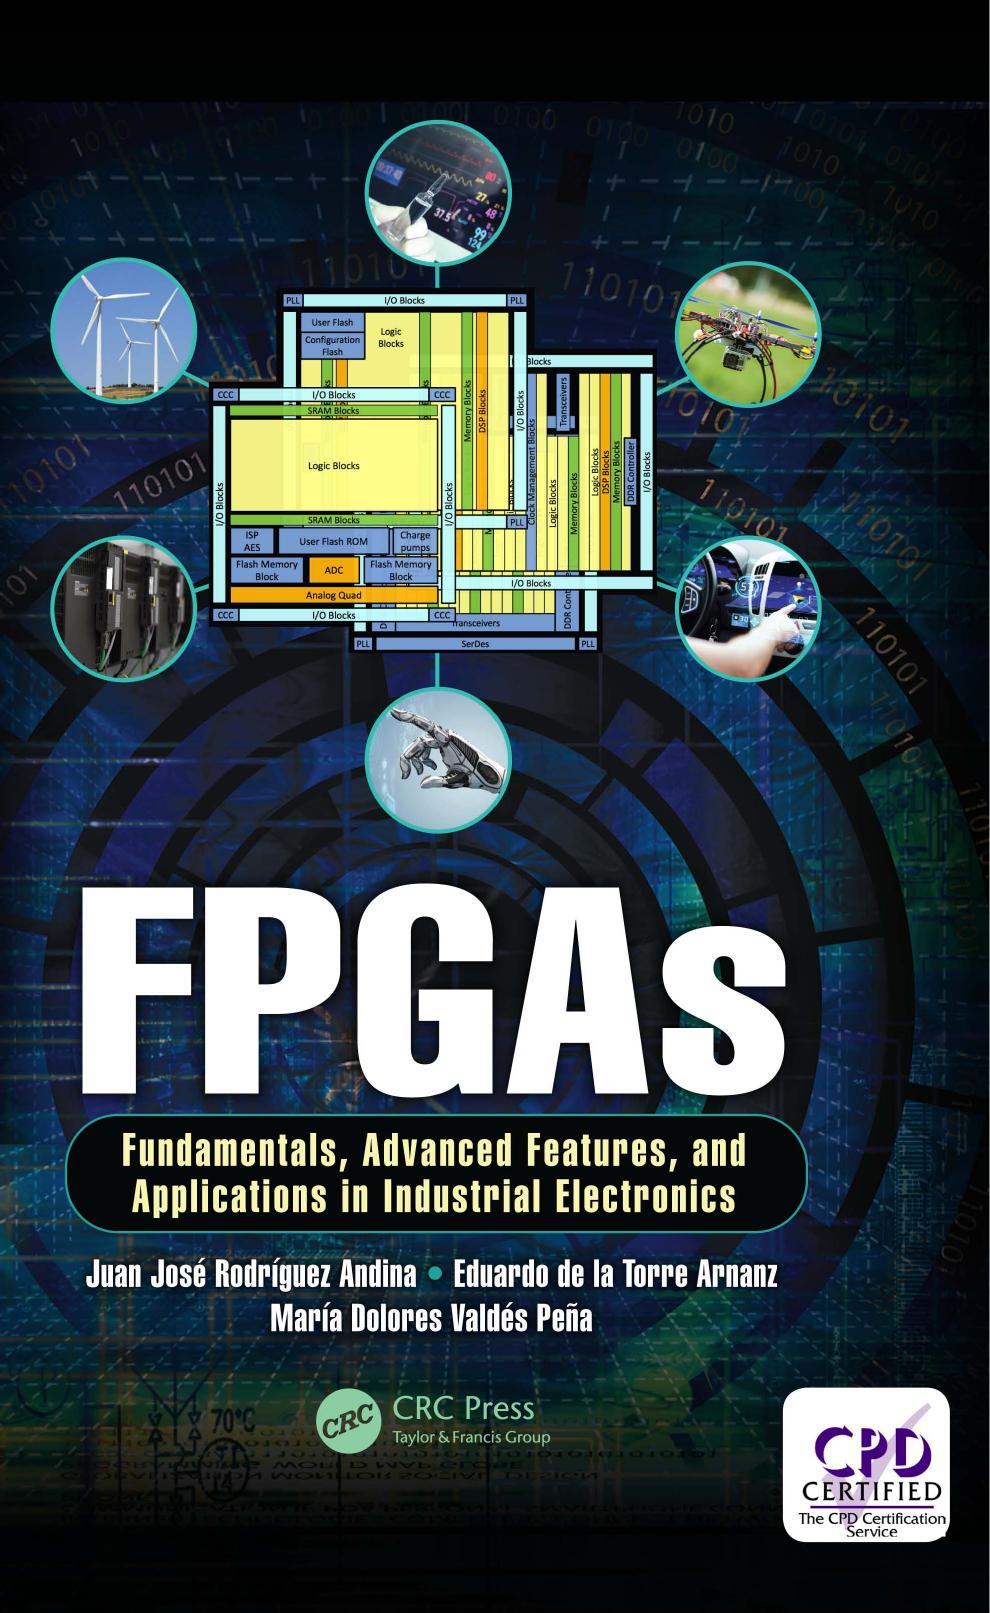 FPGAs Fundamentals, Advanced Features, and Applications in Industrial Electronics